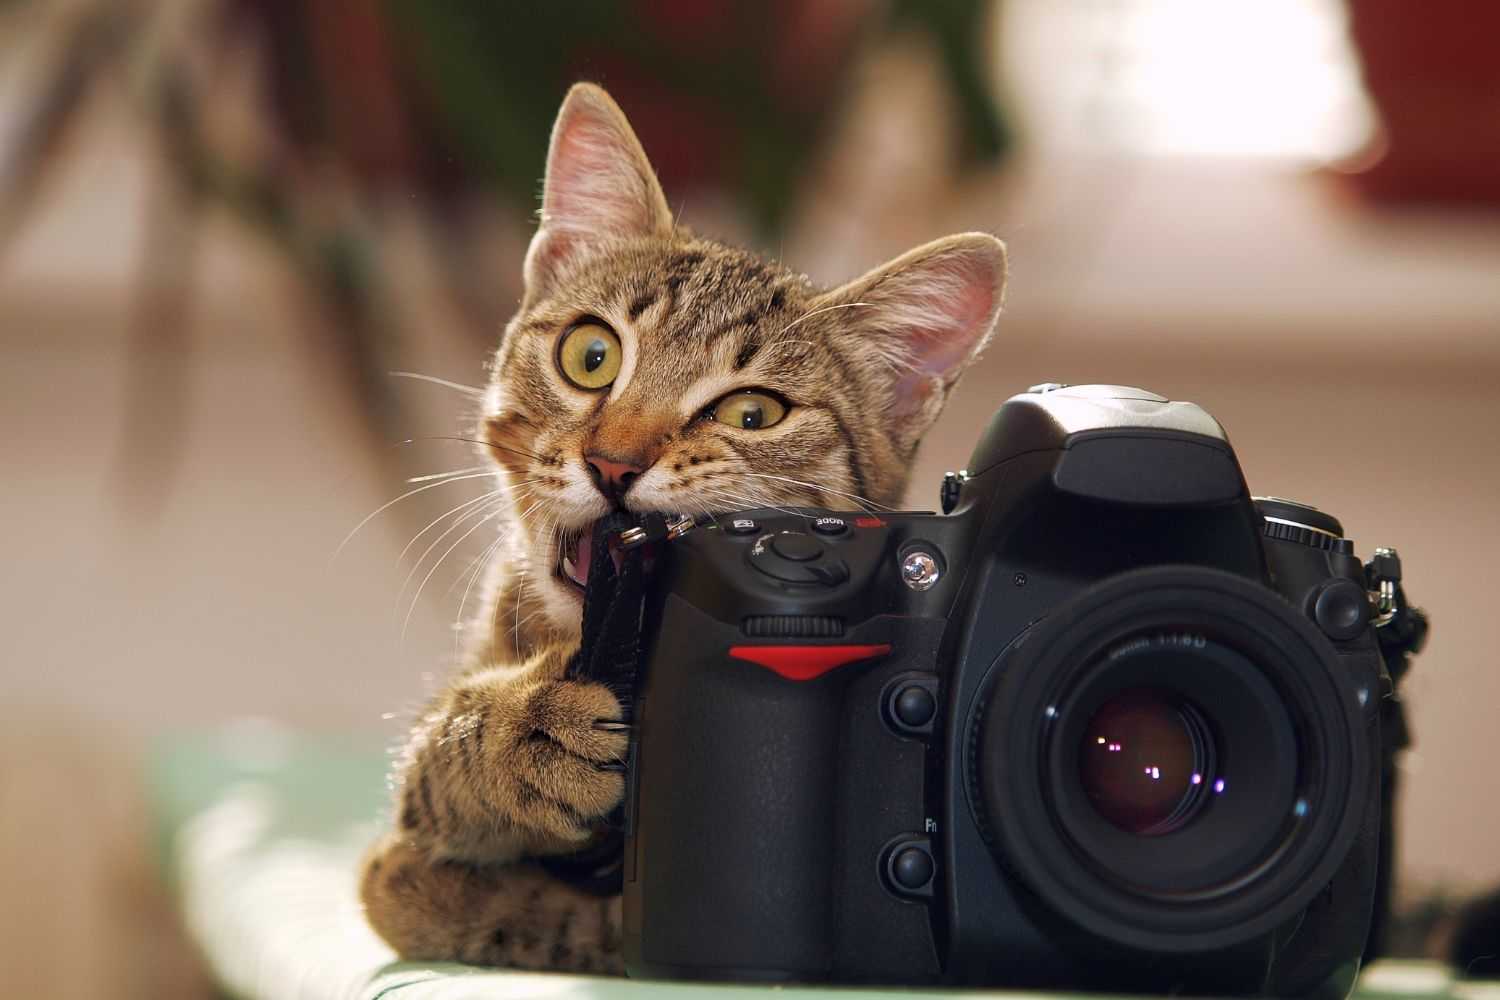 cat with camera Photo by WildlifeWorld on shutterstock